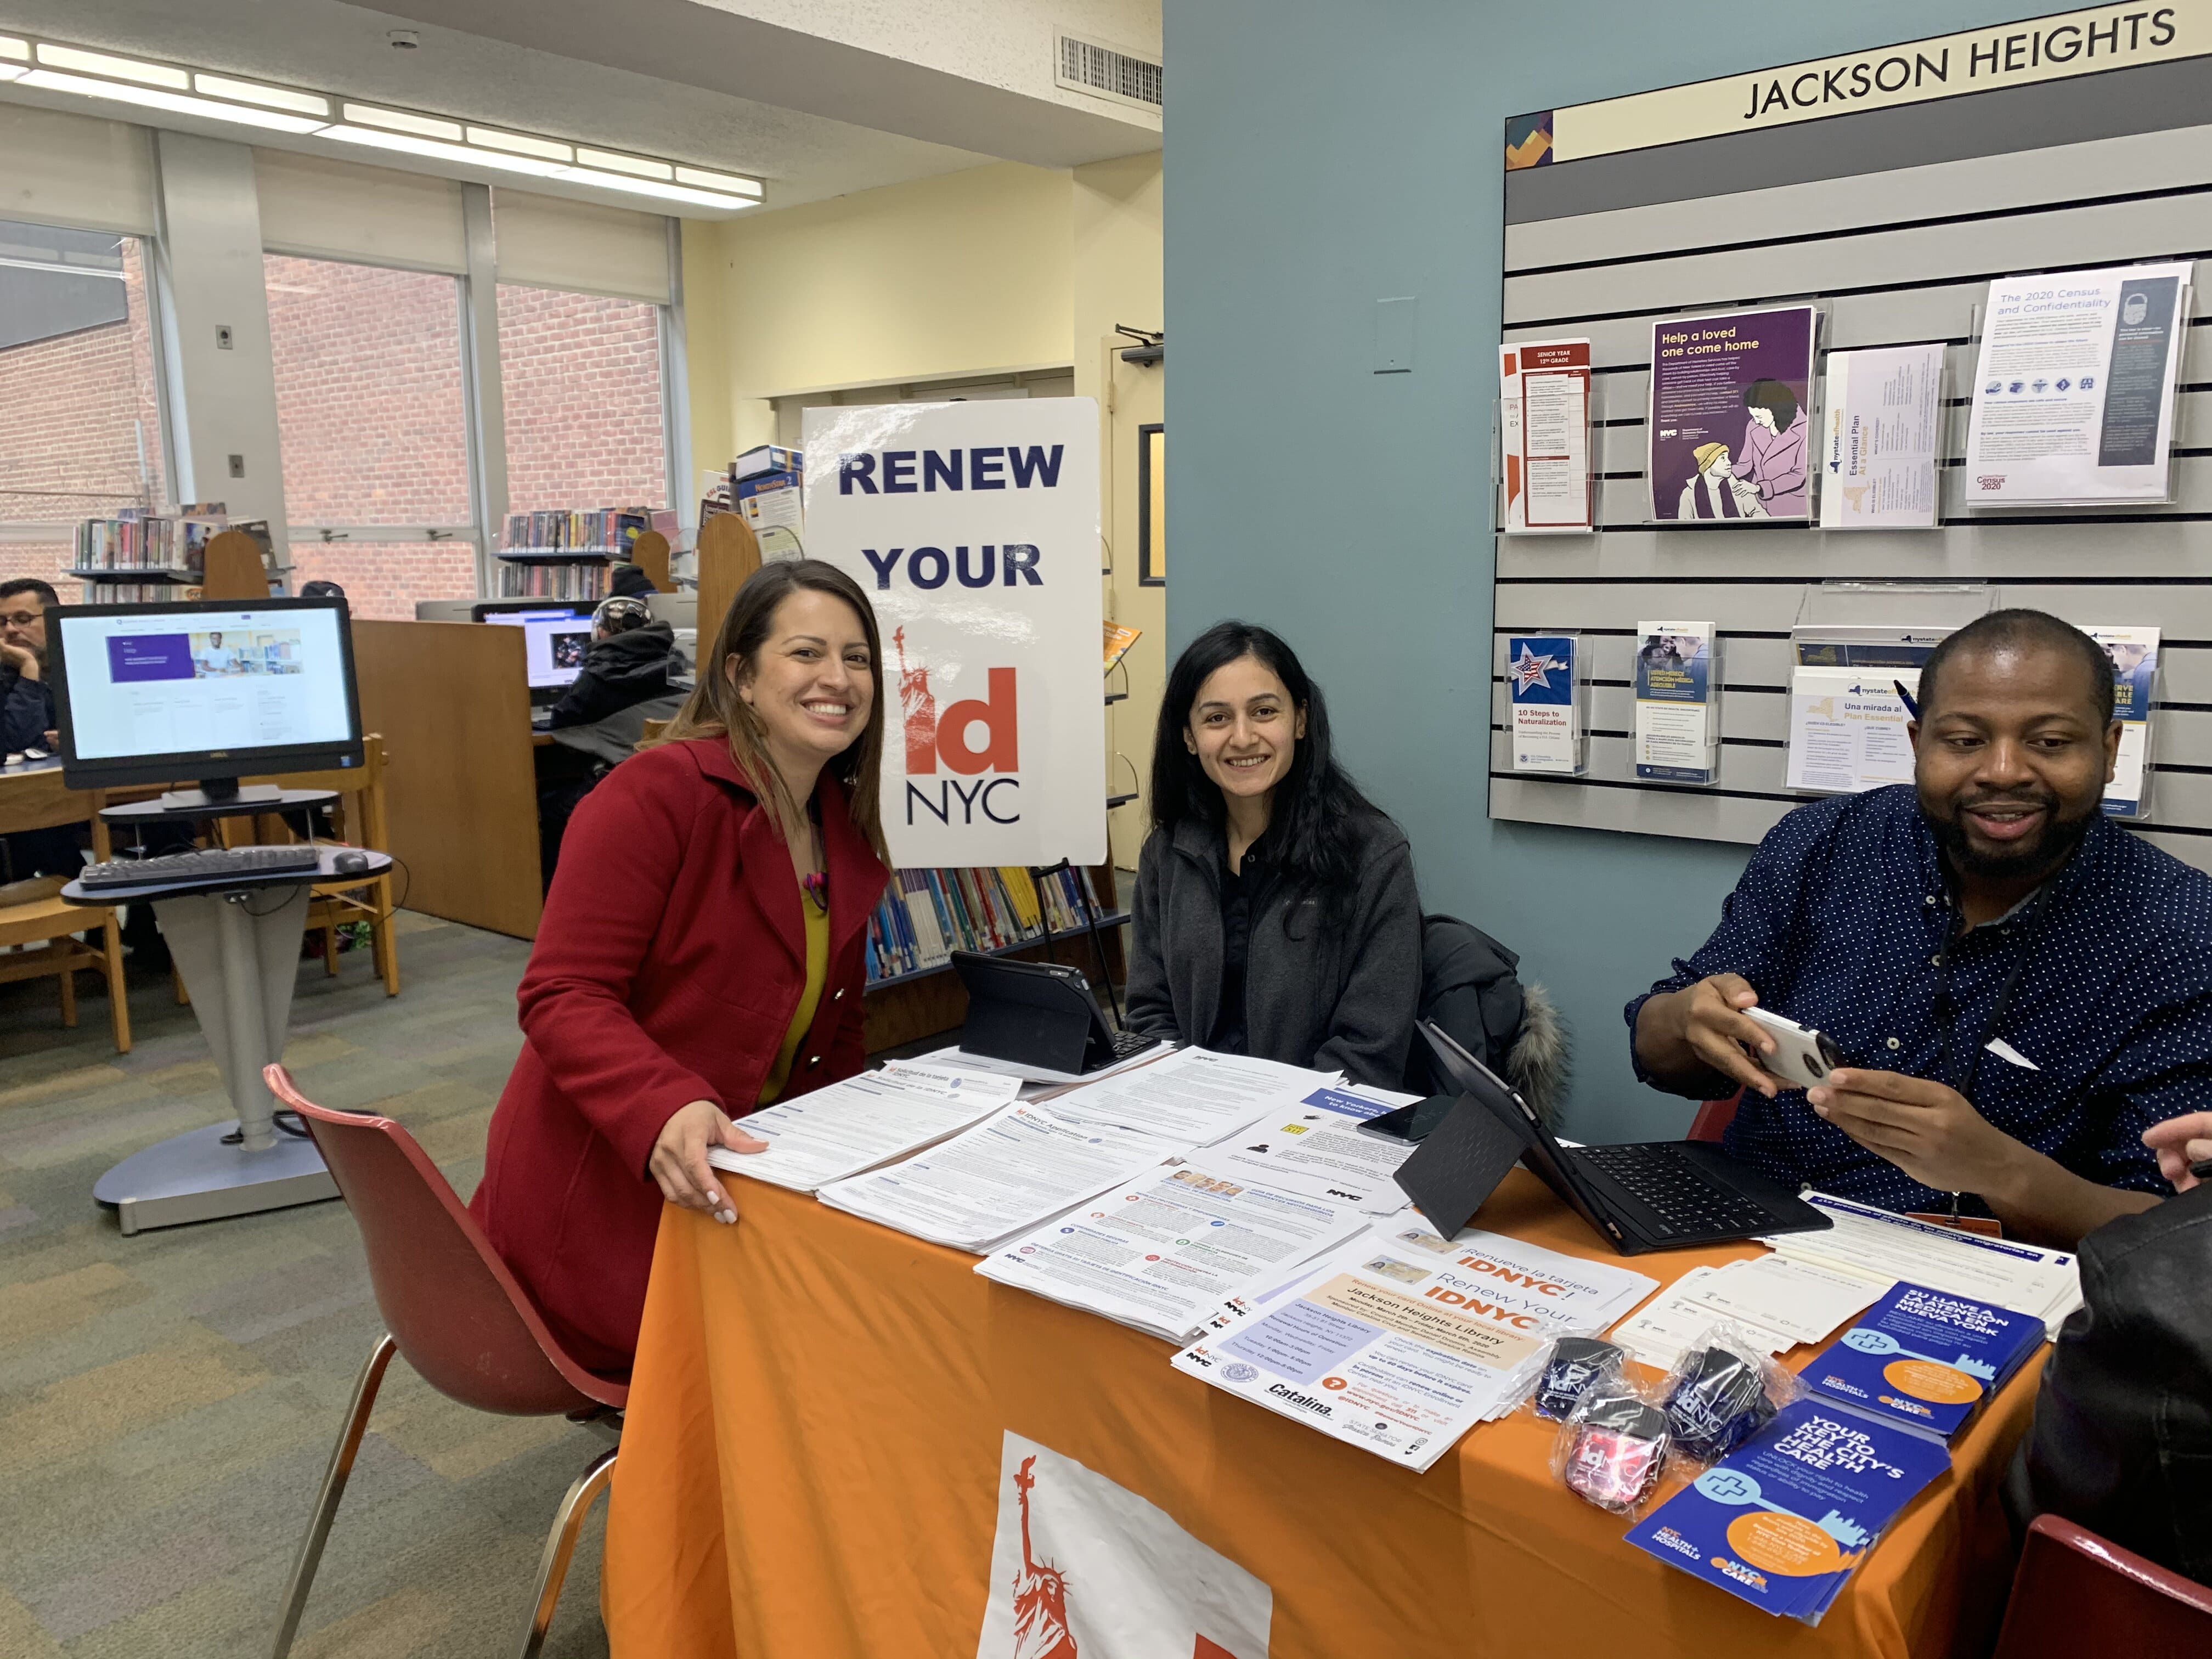 Assemblywoman Cruz at the Jackson Heights Library ensuring that members of the community get their IDNYC renewed.